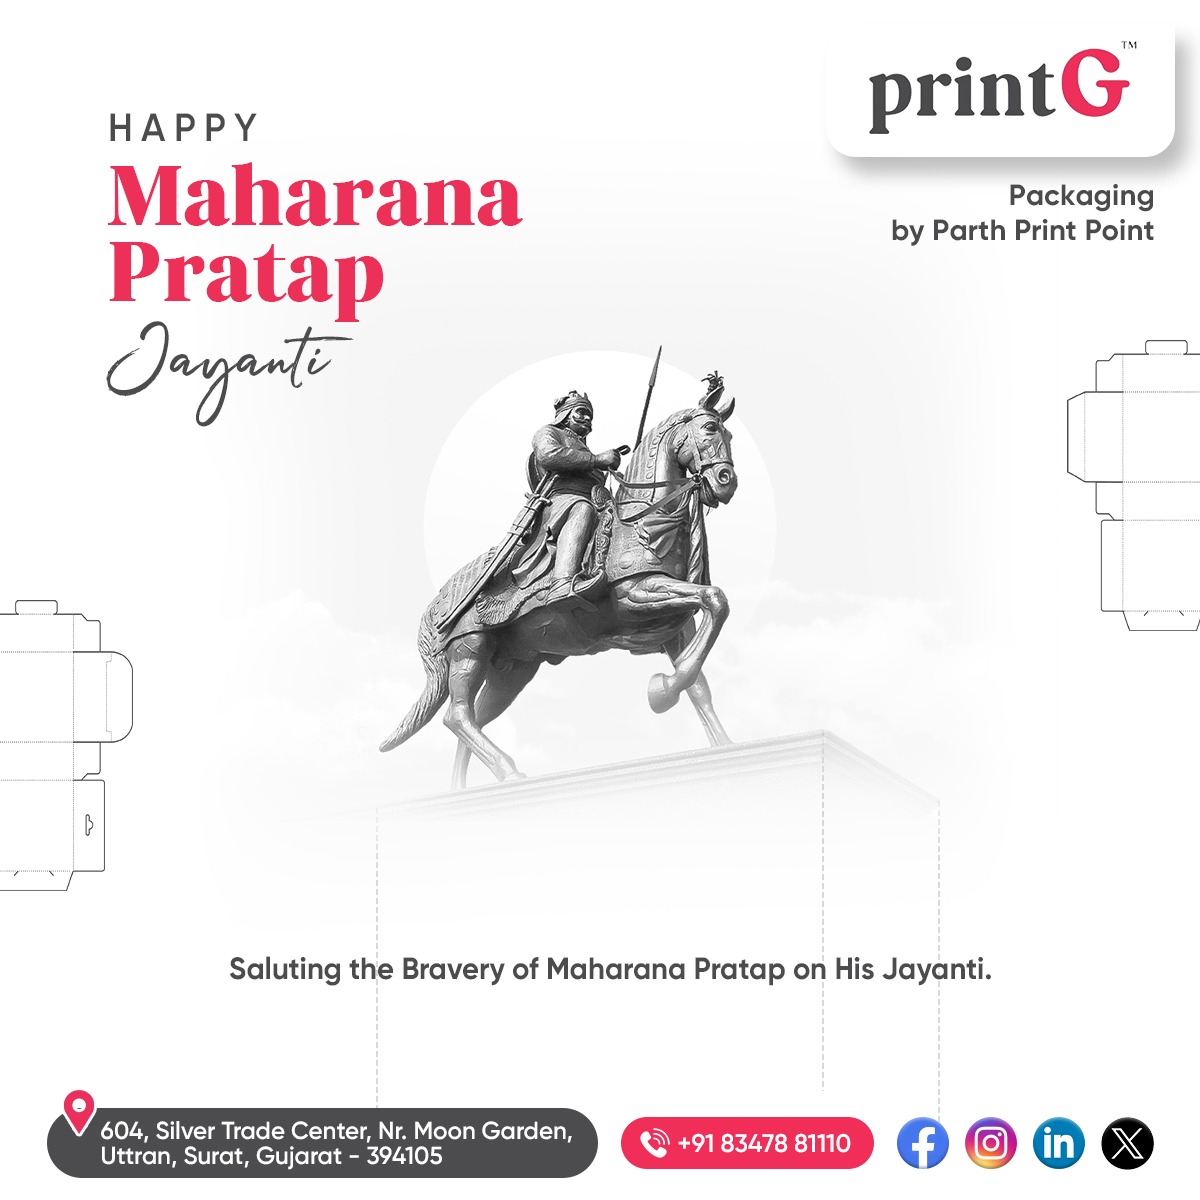 Just like Maharana Pratap's unwavering commitment, our packaging solutions are built to endure. Protect your product and elevate your brand with PrintG! #PackagingSolutions #PremiumPackaging